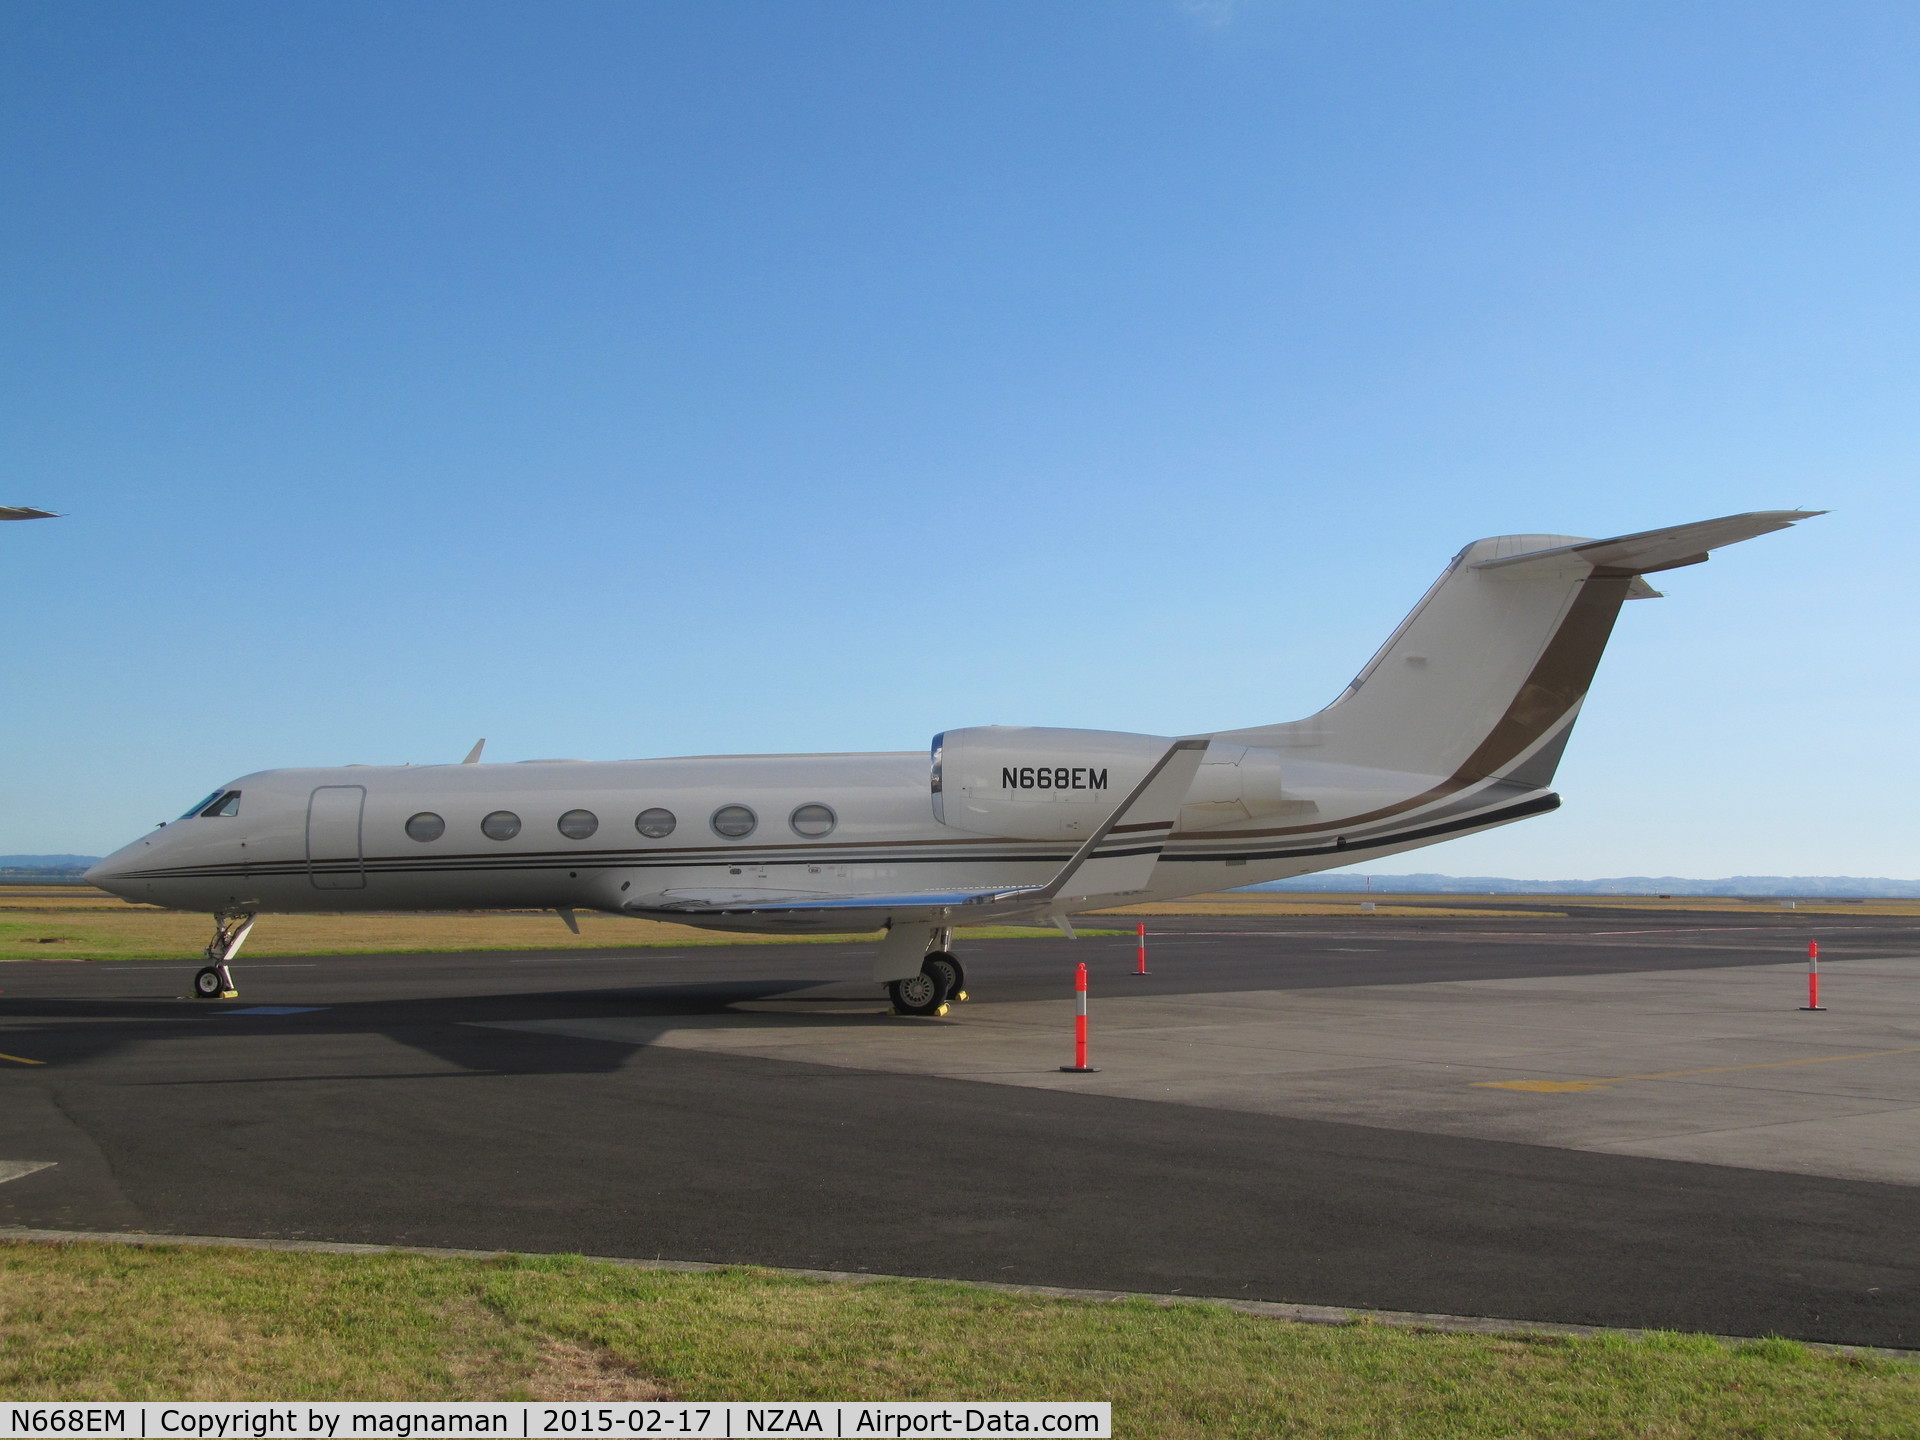 N668EM, 2013 Gulfstream Aerospace GIV-X (G450) C/N 4299, in at AKL - first time visitor. May be based in Asia?